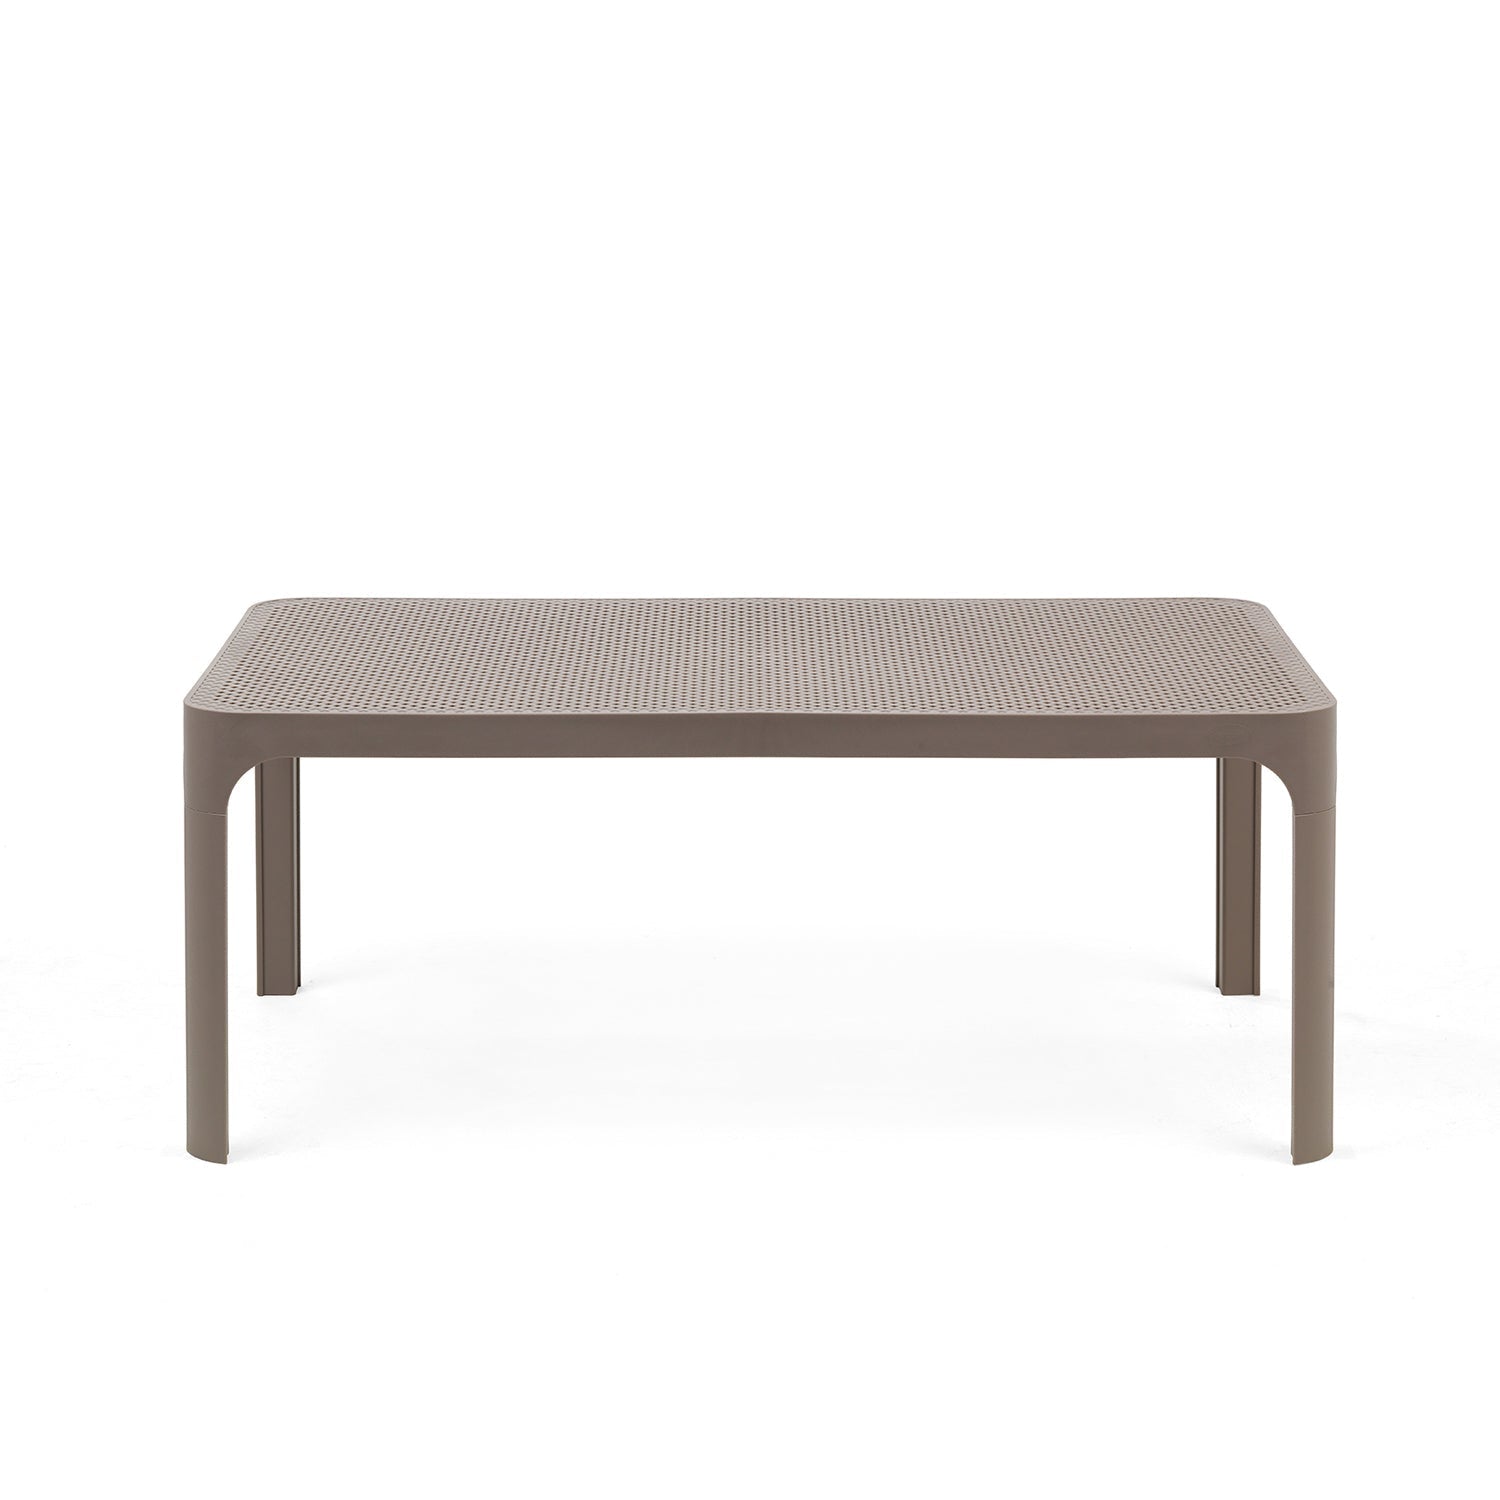 Net Table 100cm Garden Table By Nardi - Taupe